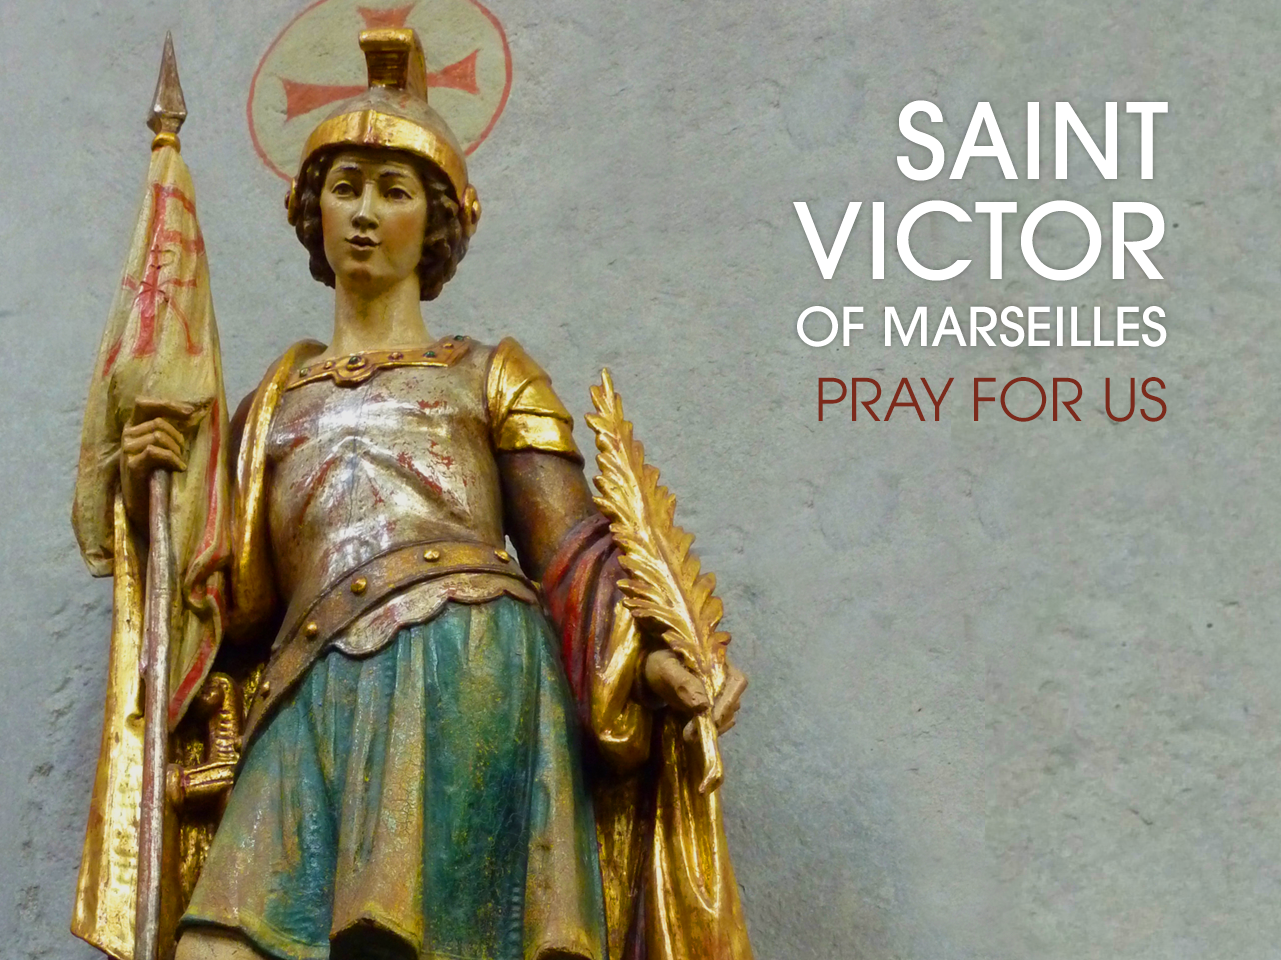 St. Victor of Marseilles